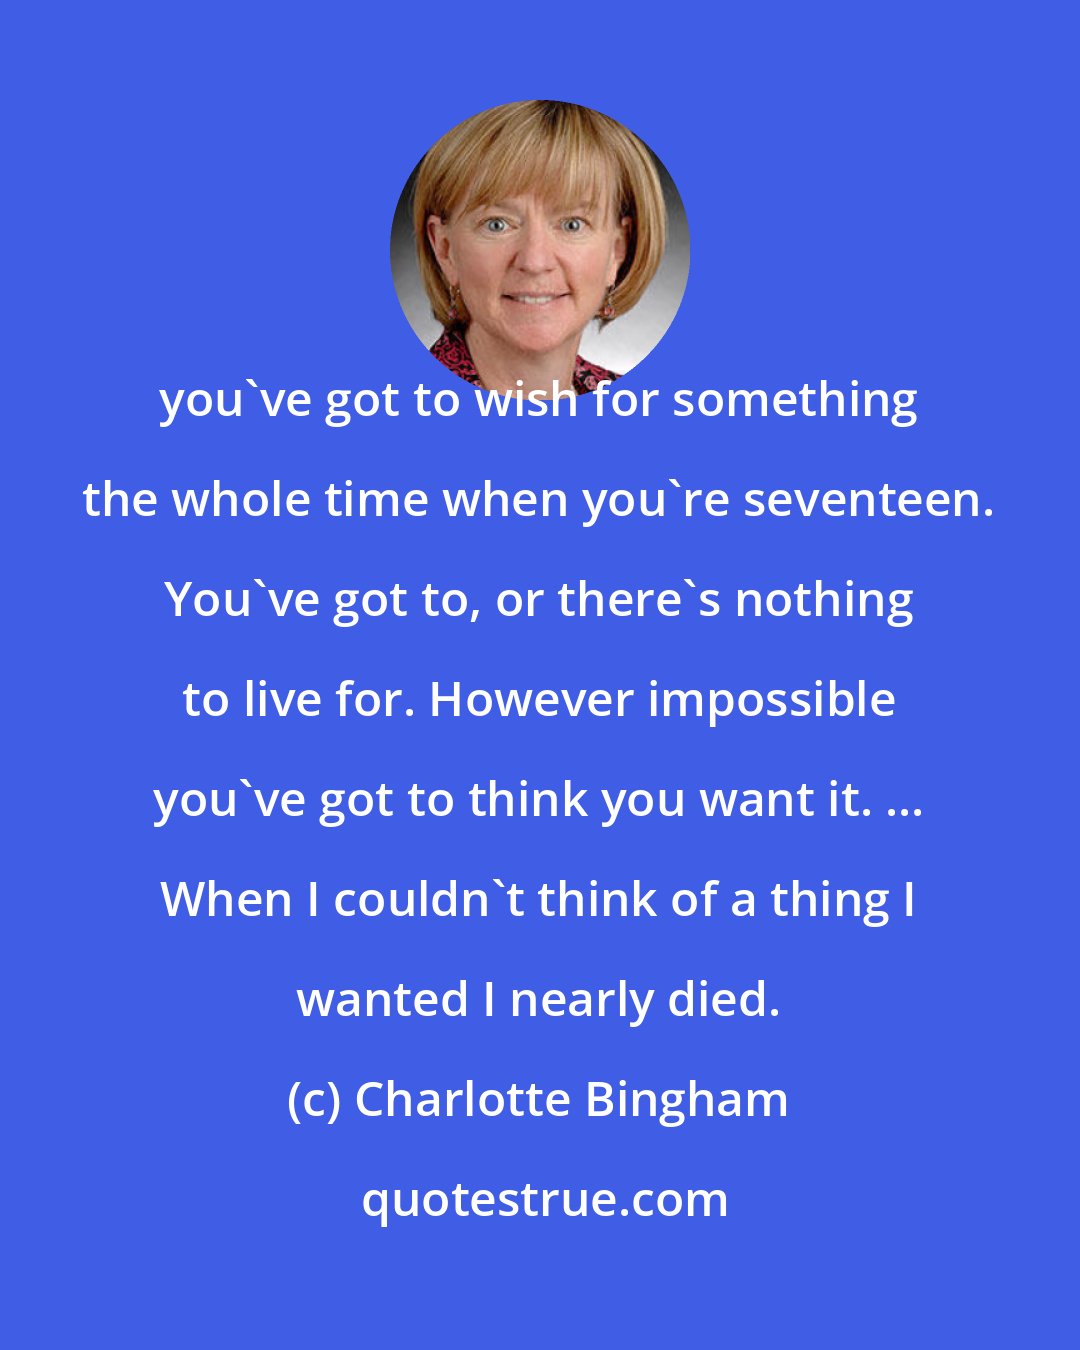 Charlotte Bingham: you've got to wish for something the whole time when you're seventeen. You've got to, or there's nothing to live for. However impossible you've got to think you want it. ... When I couldn't think of a thing I wanted I nearly died.